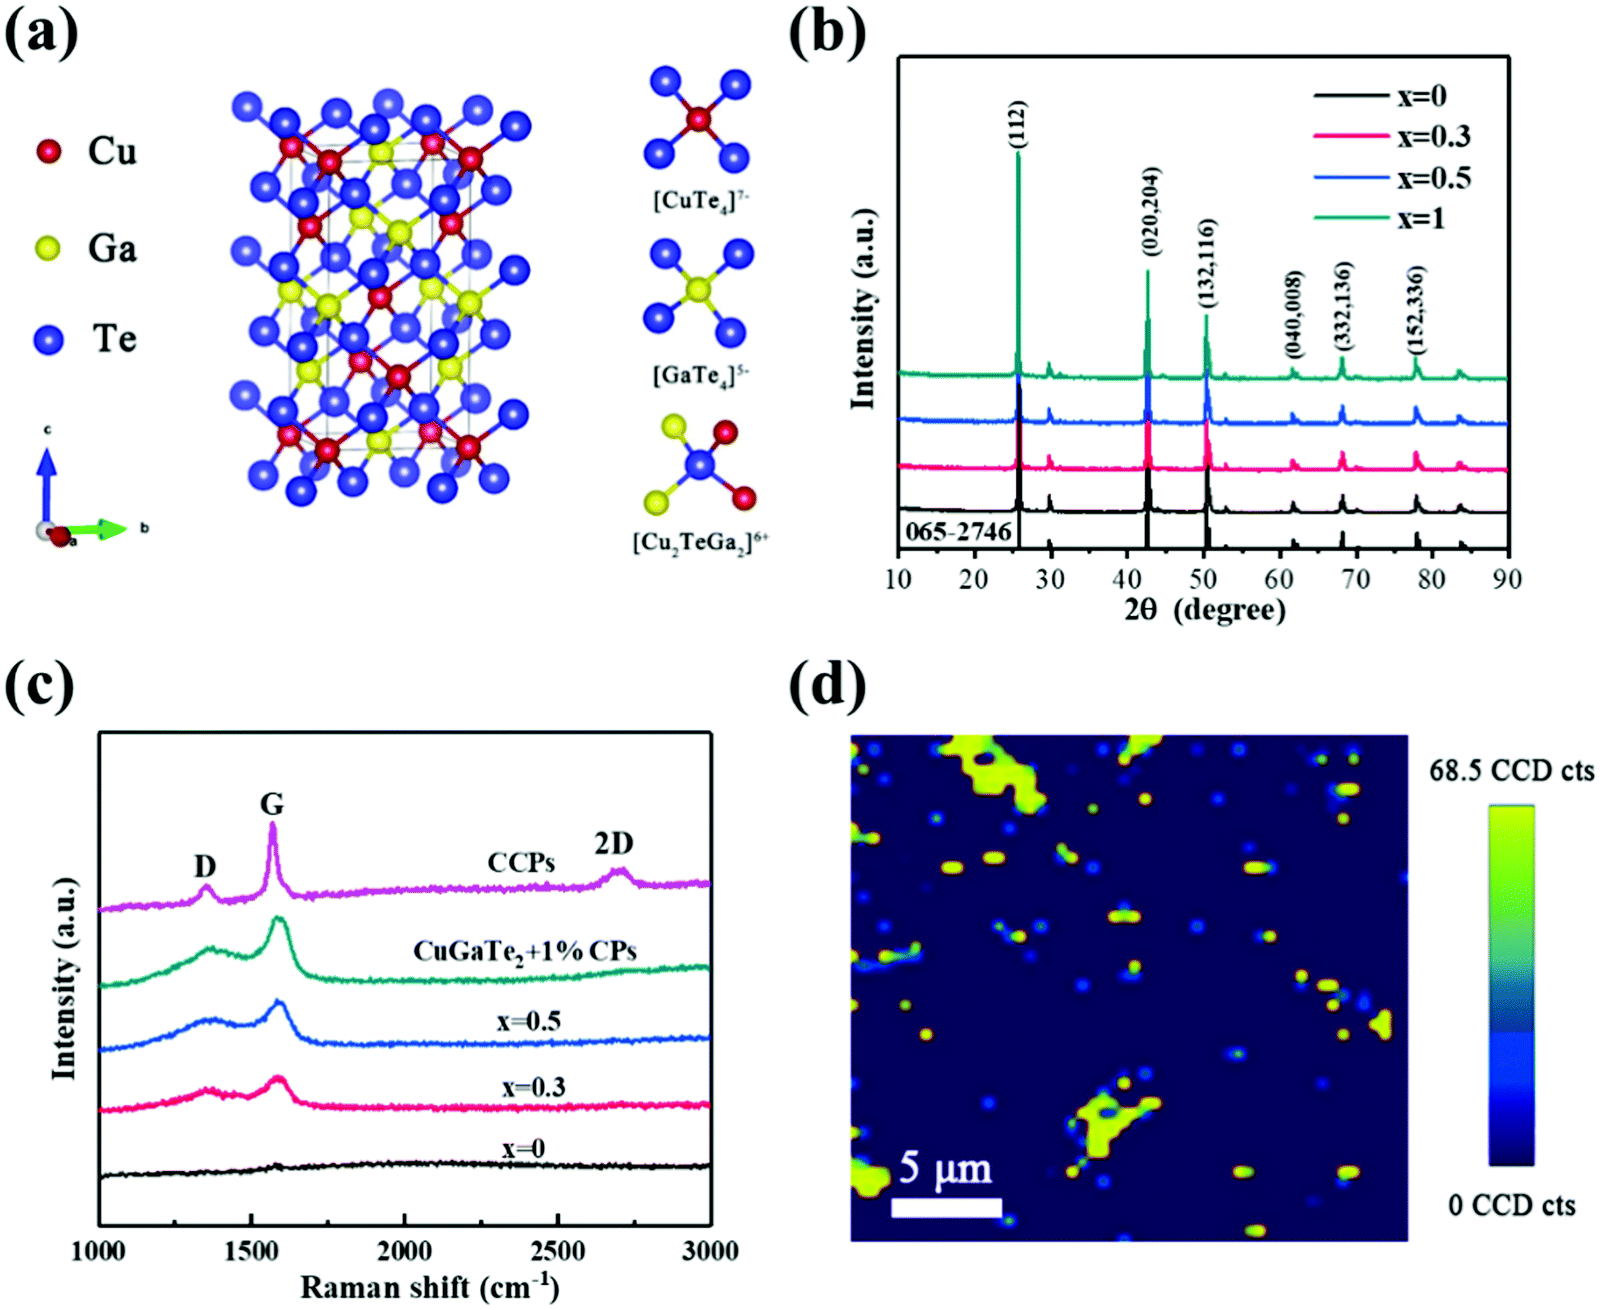 Synergistically Optimized Electrical And Thermal Properties By Introducing Electron Localization And Phonon Scattering Centers In Cugate 2 With Enhanc Journal Of Materials Chemistry C Rsc Publishing Doi 10 1039 D0tca